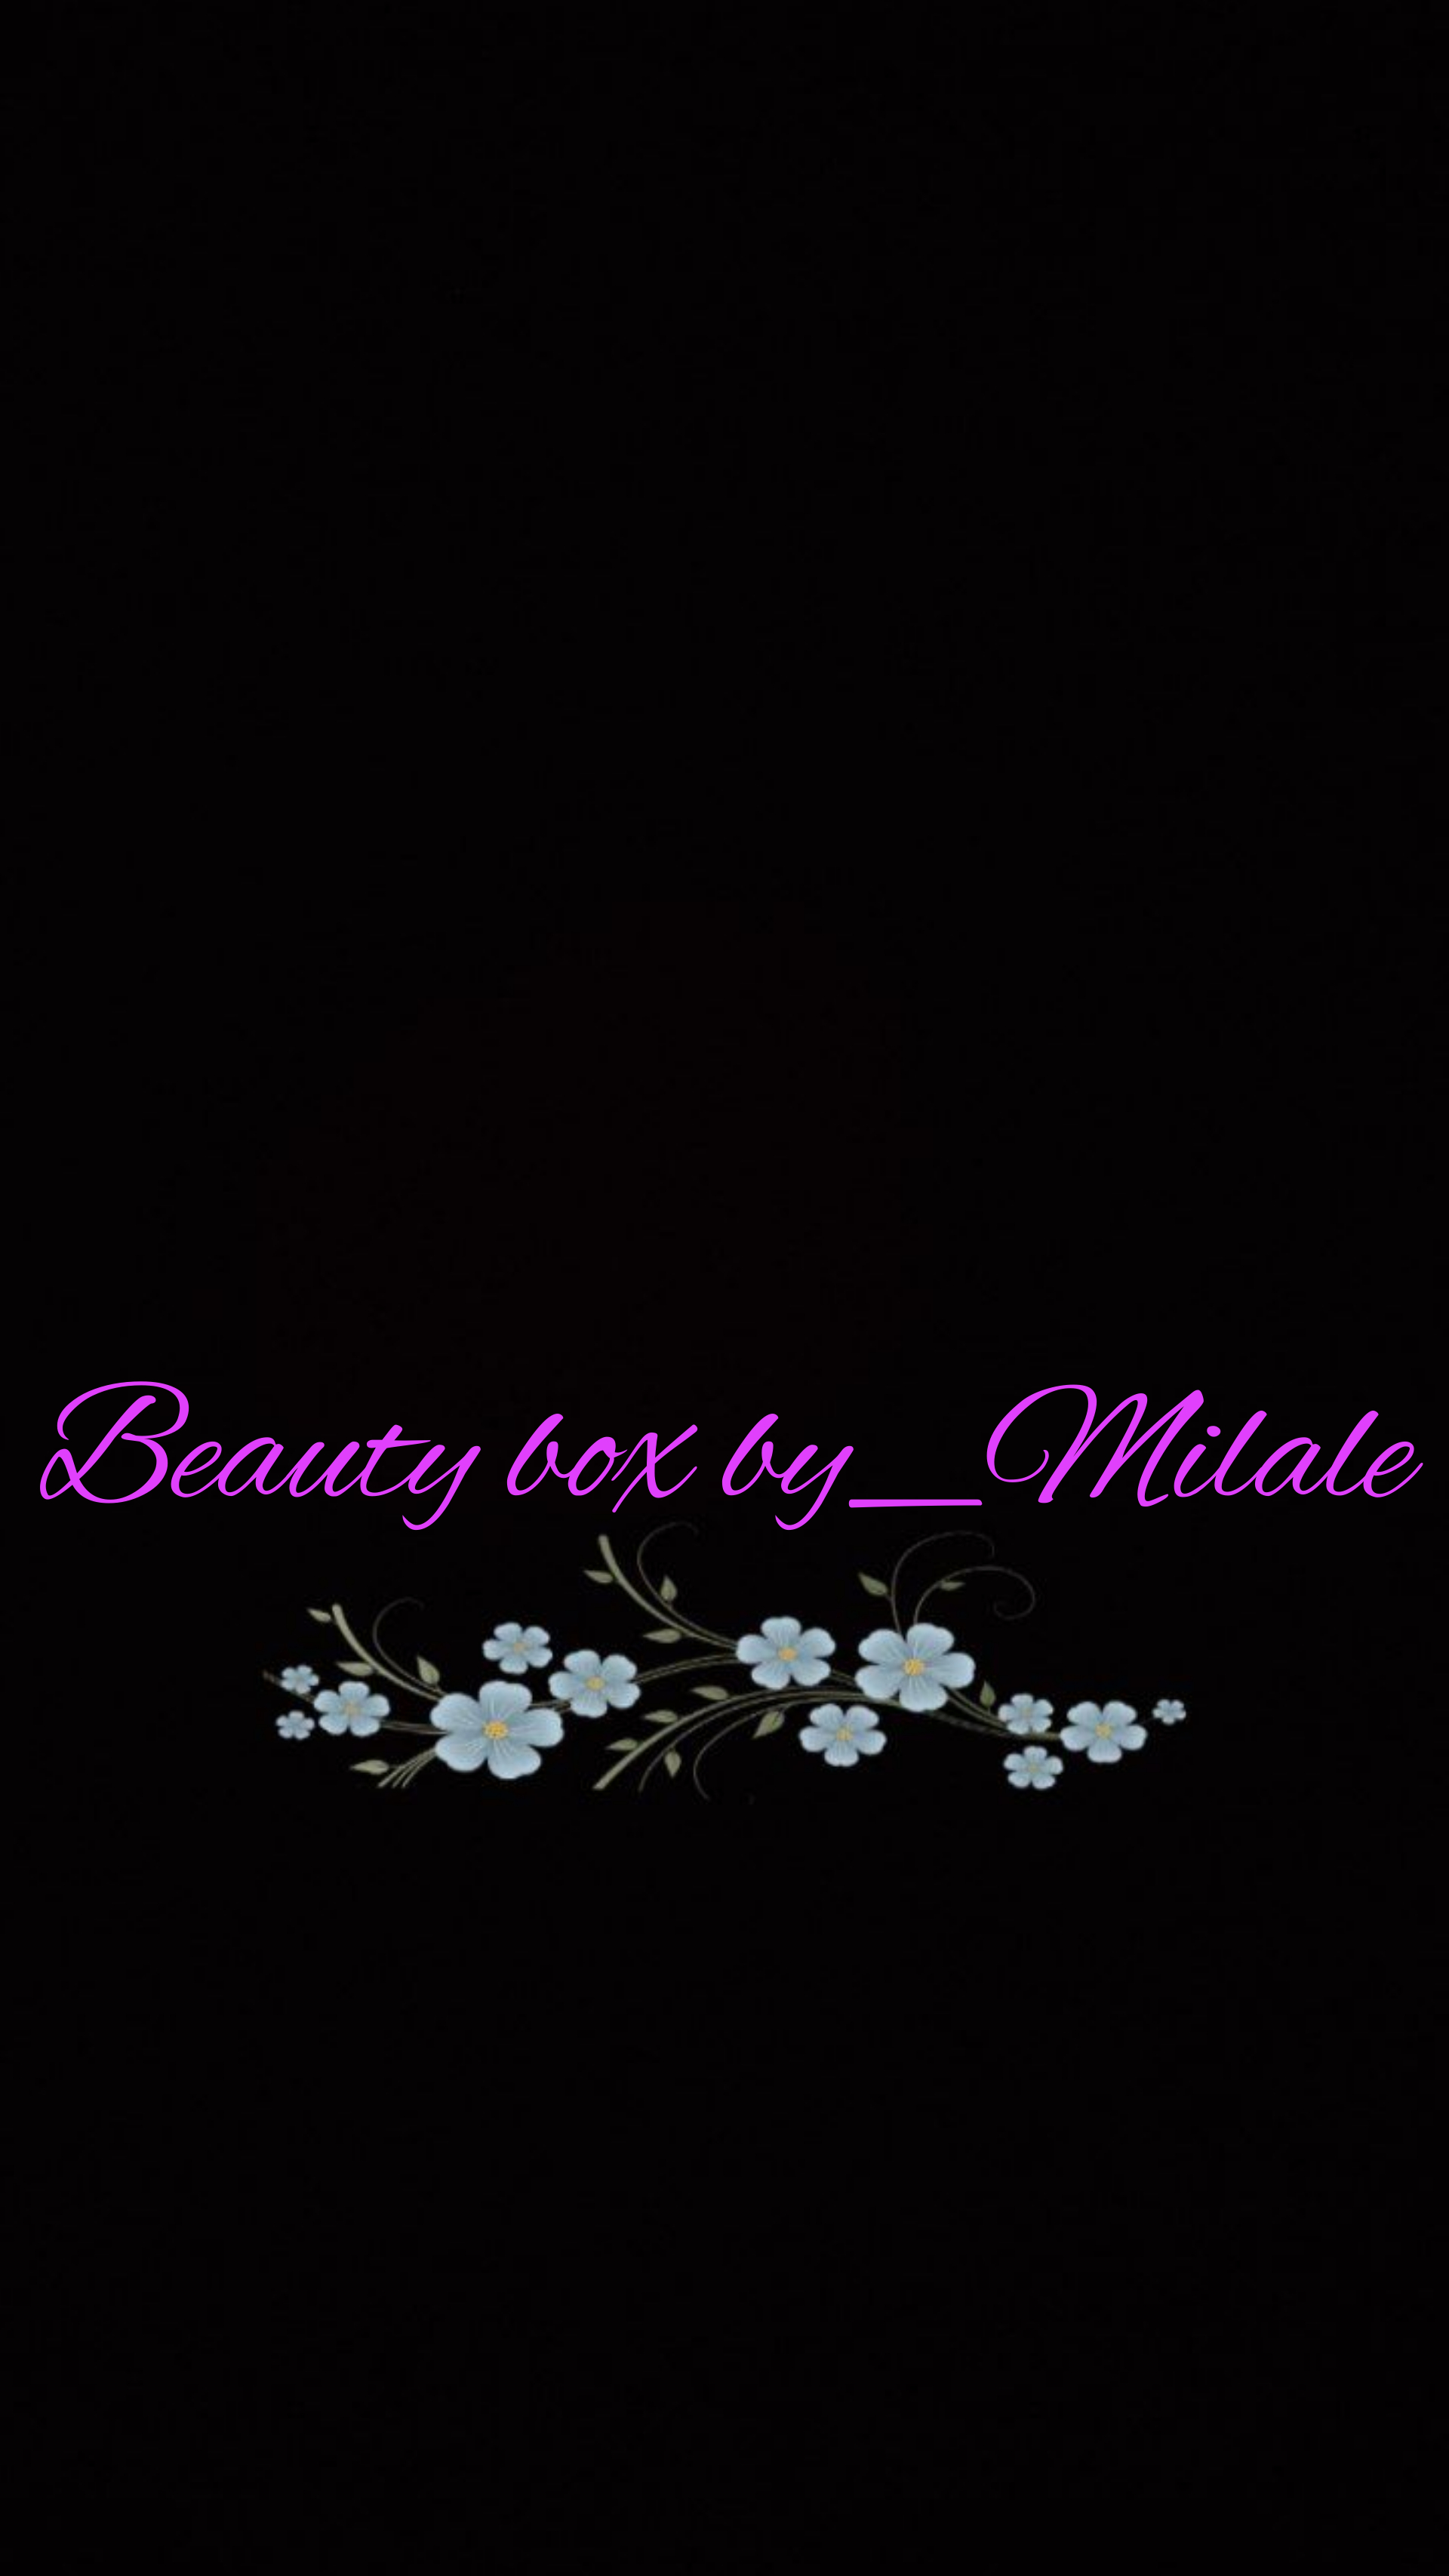 Beauty box by_Milale